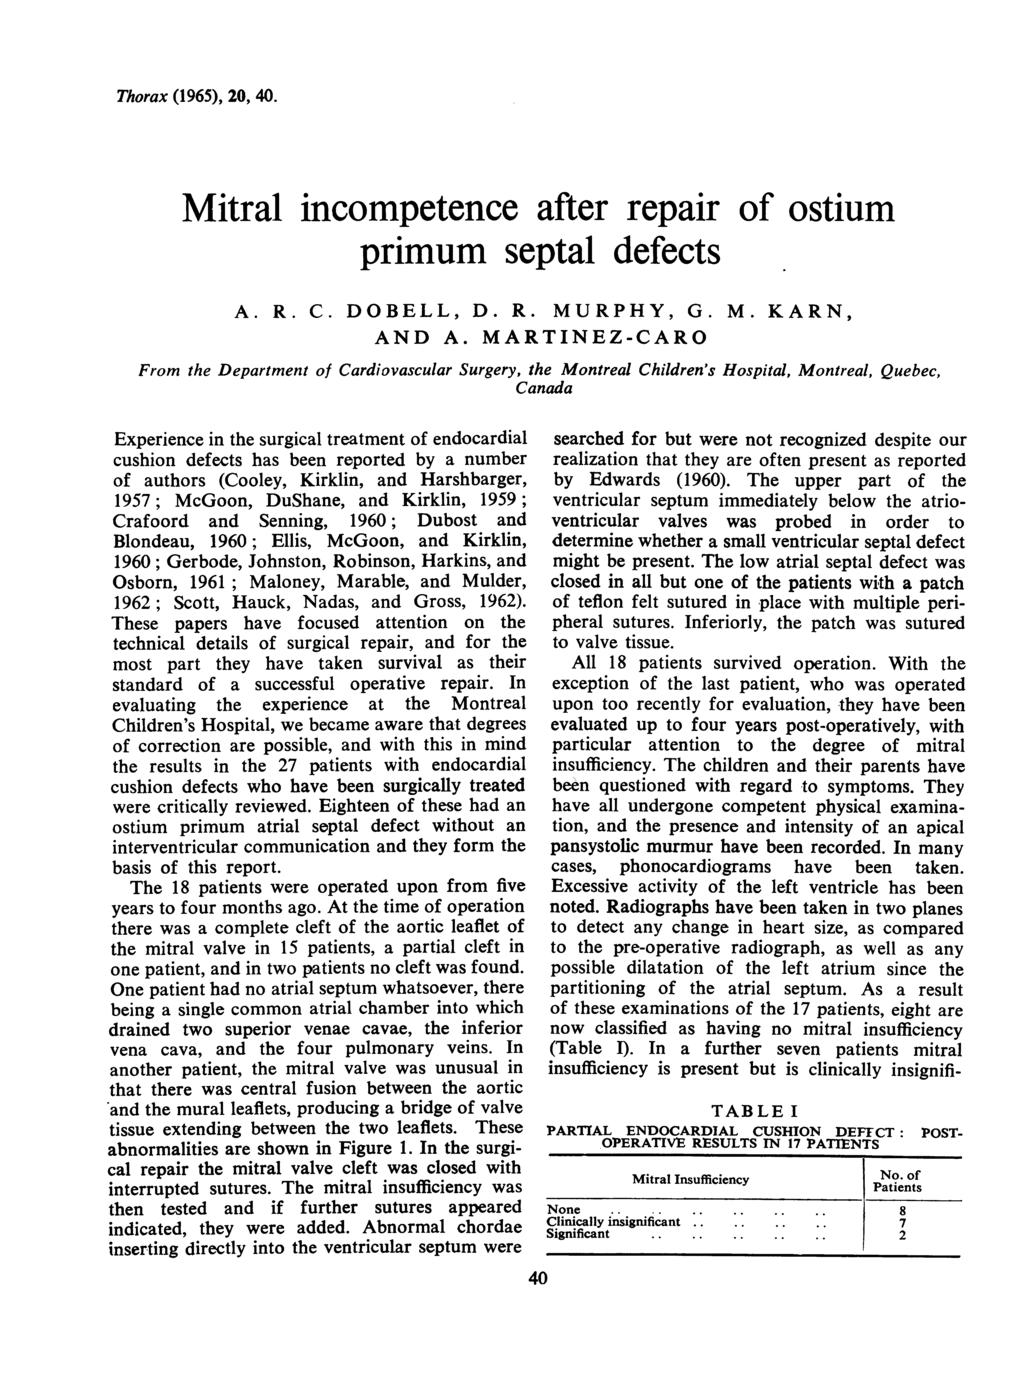 Thorax (1965), 20, 40. Mitral incompetence after repair of ostium primum septal defects A. R. C. DOBELL, D. R. MURPHY, G. M. KARN, AND A.